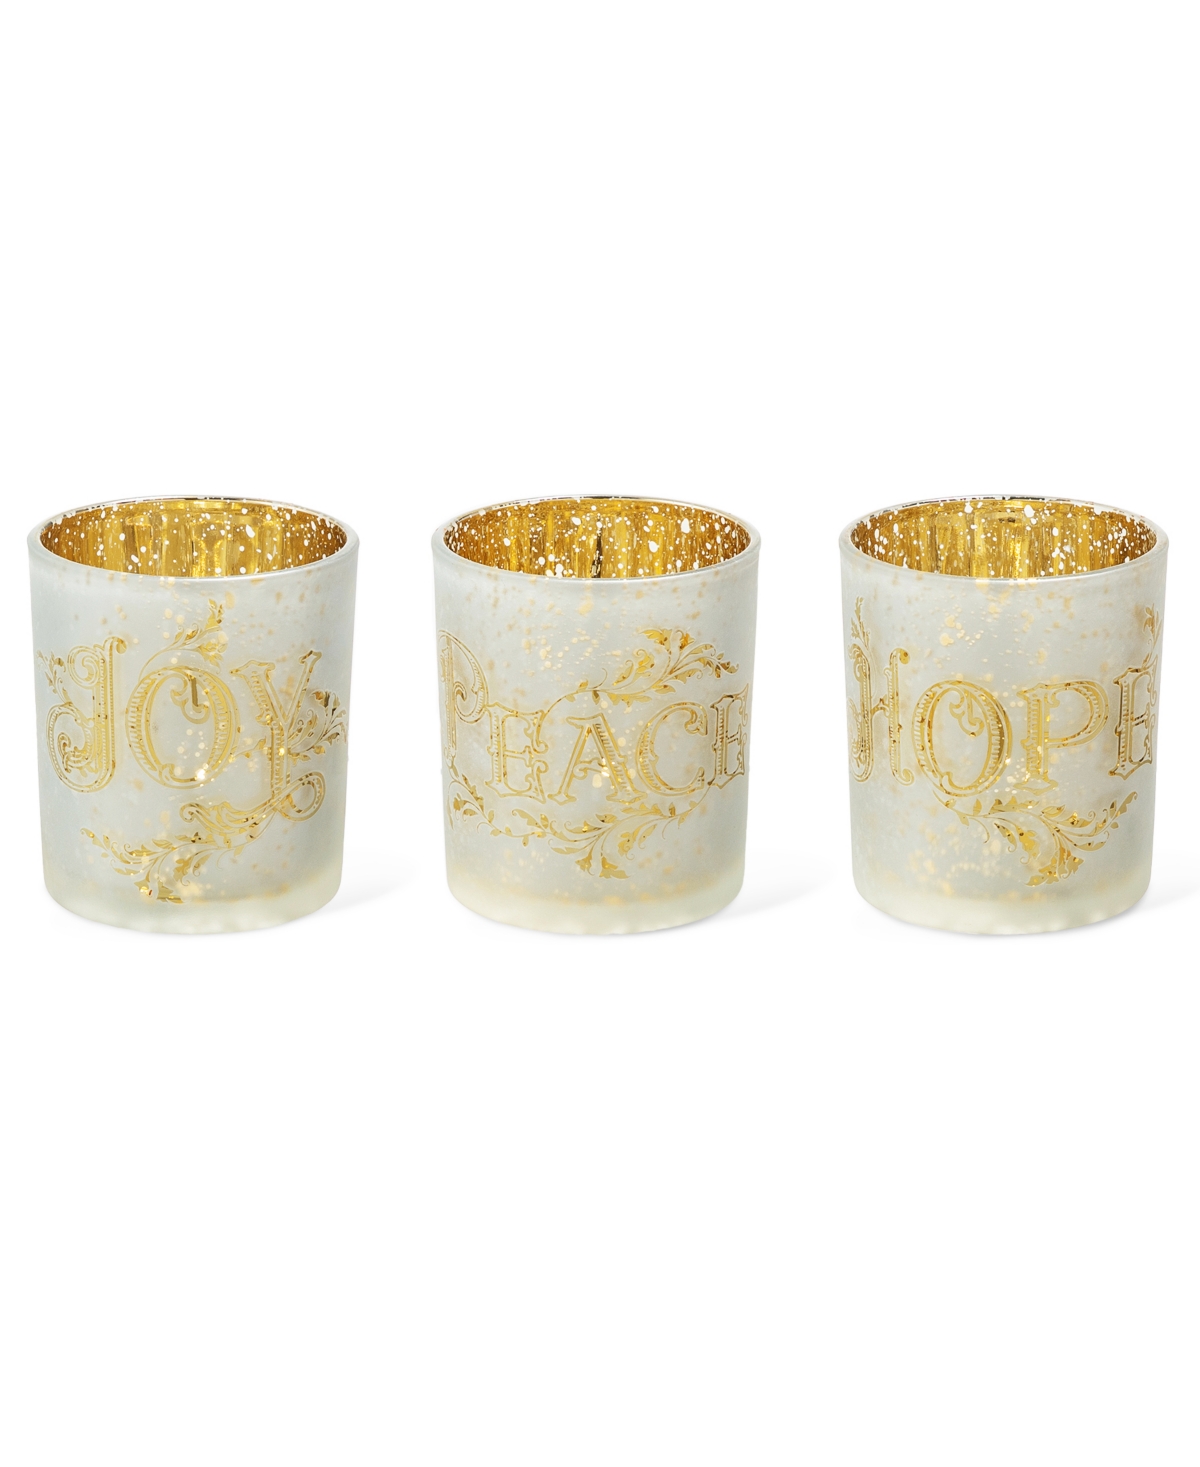 Glitzhome Set Of 3 Nativity Glass Votive Or Pillar Candle Holders In Multi